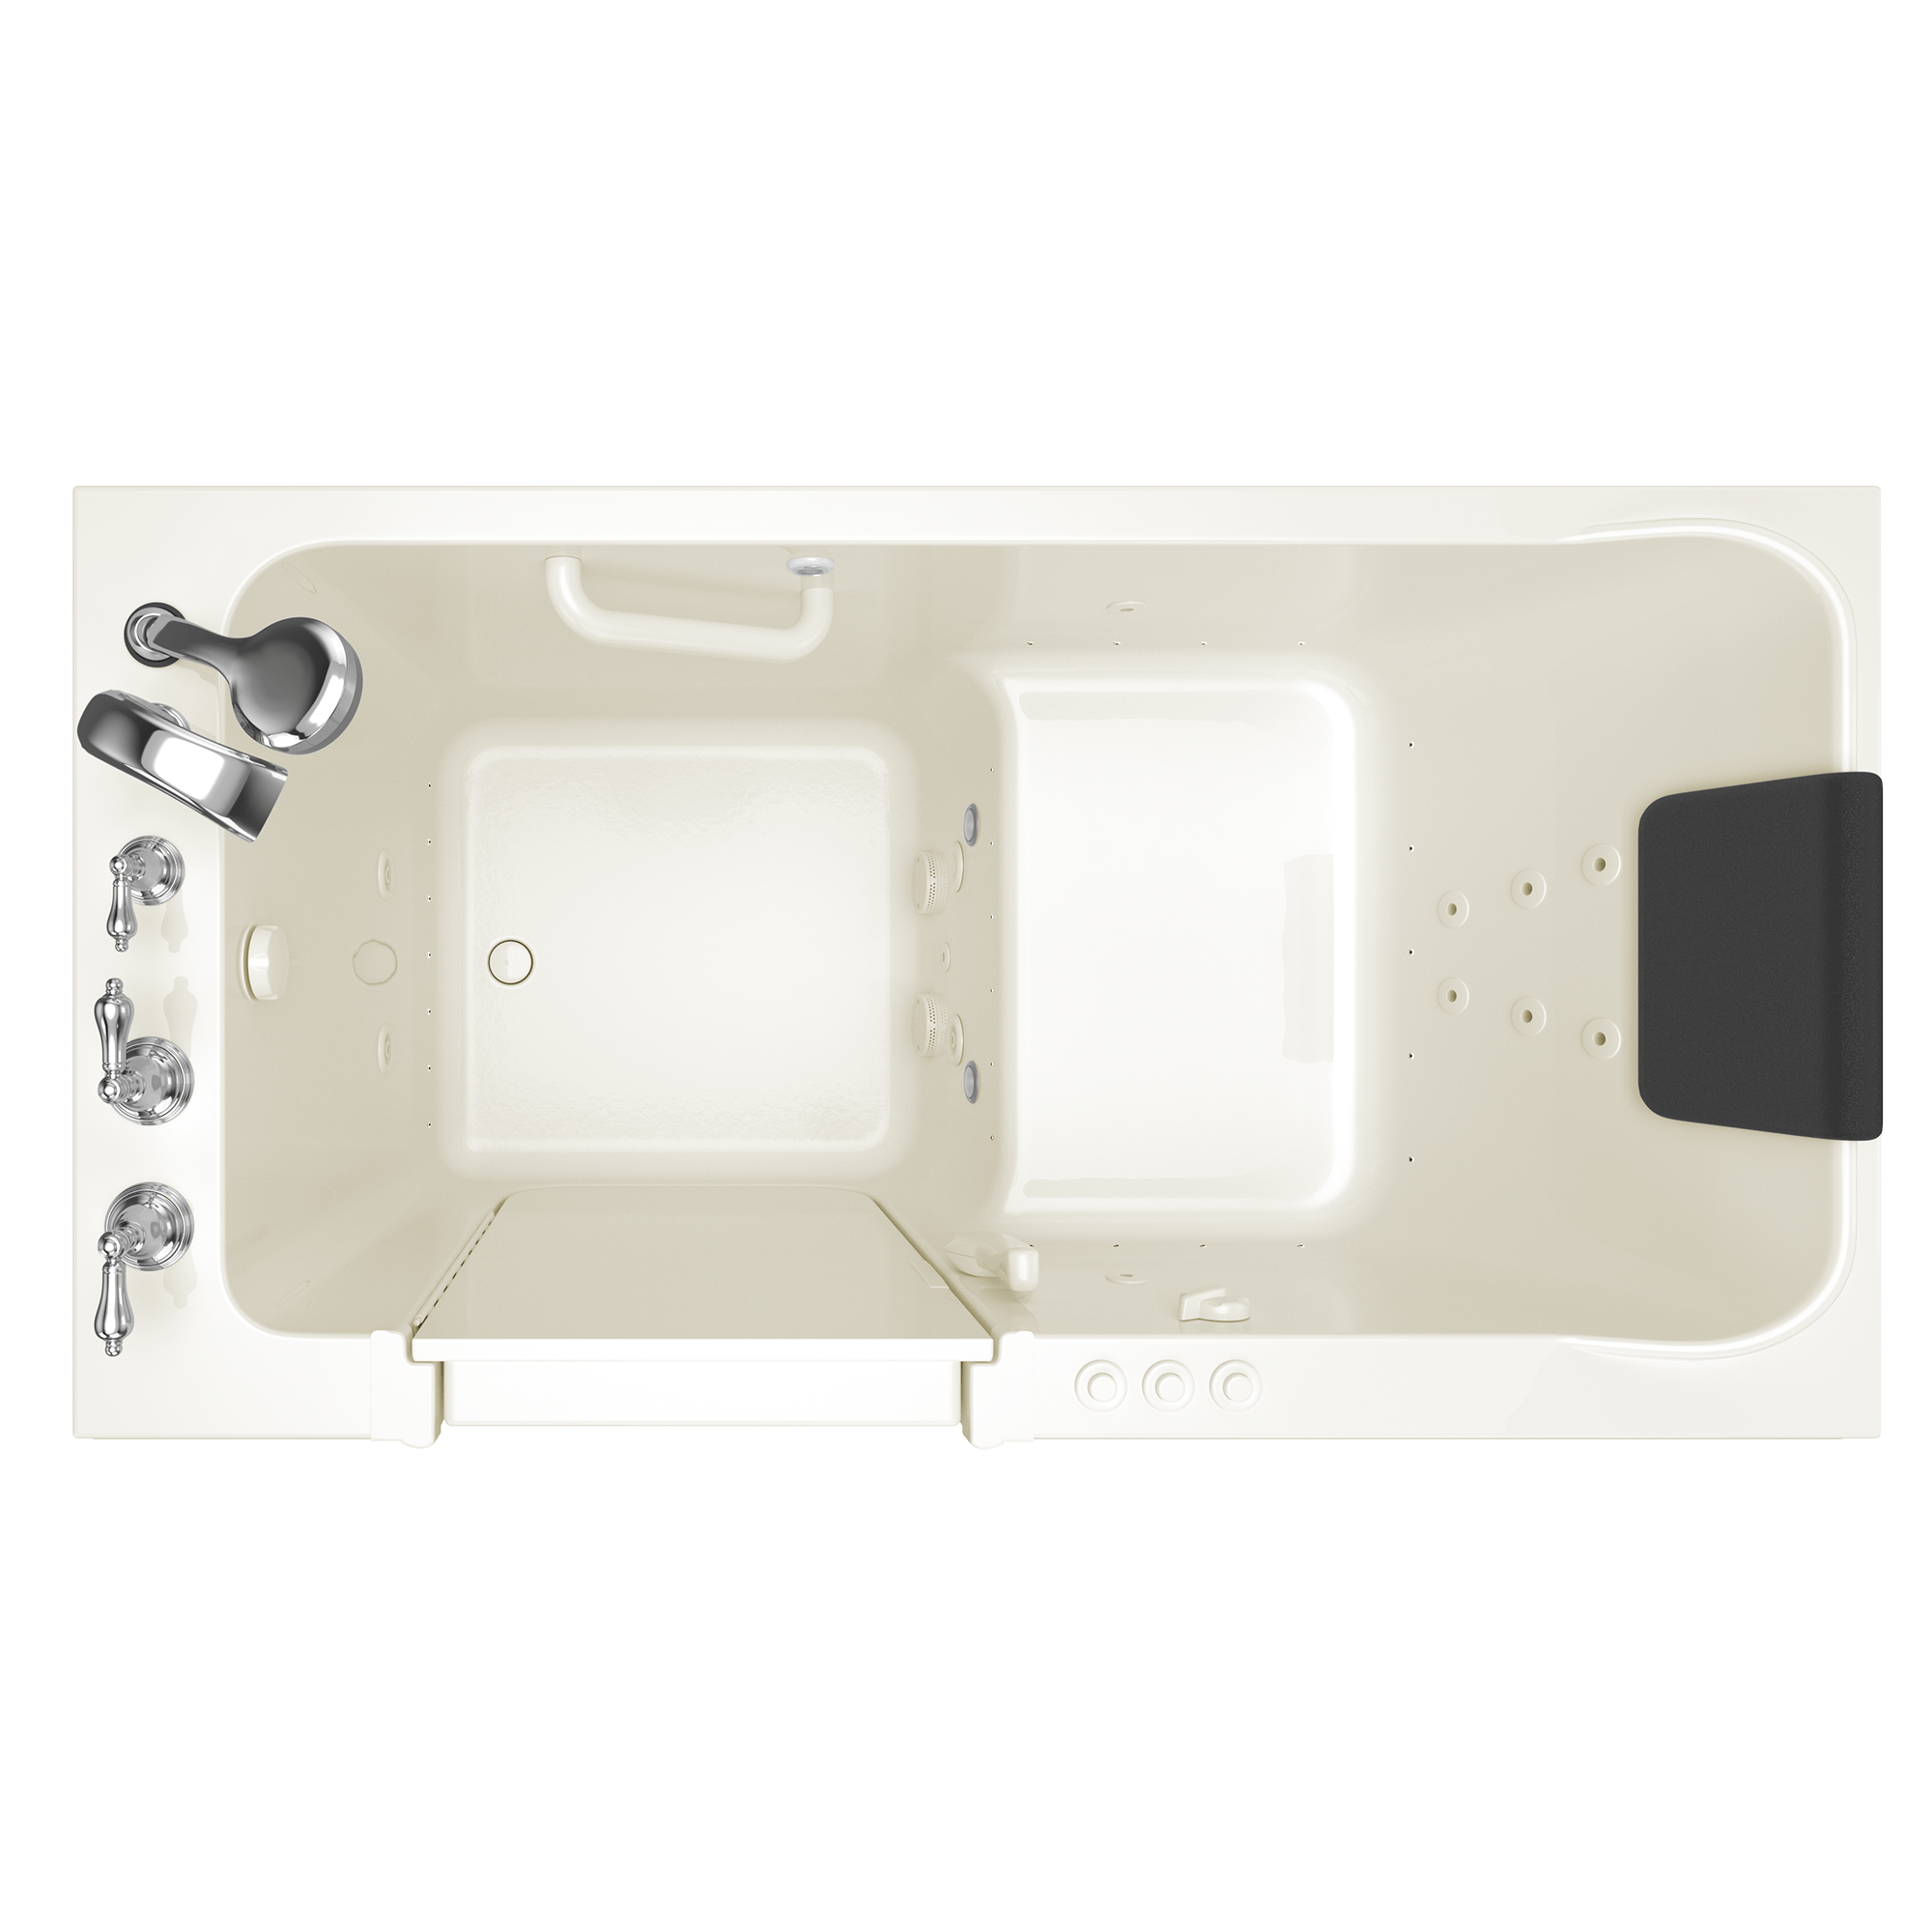 Acrylic Luxury Series 32 x 60  Inch Walk in Tub With Combination Air Spa and Whirlpool Systems   Left Hand Drain With Faucet WIB LINEN